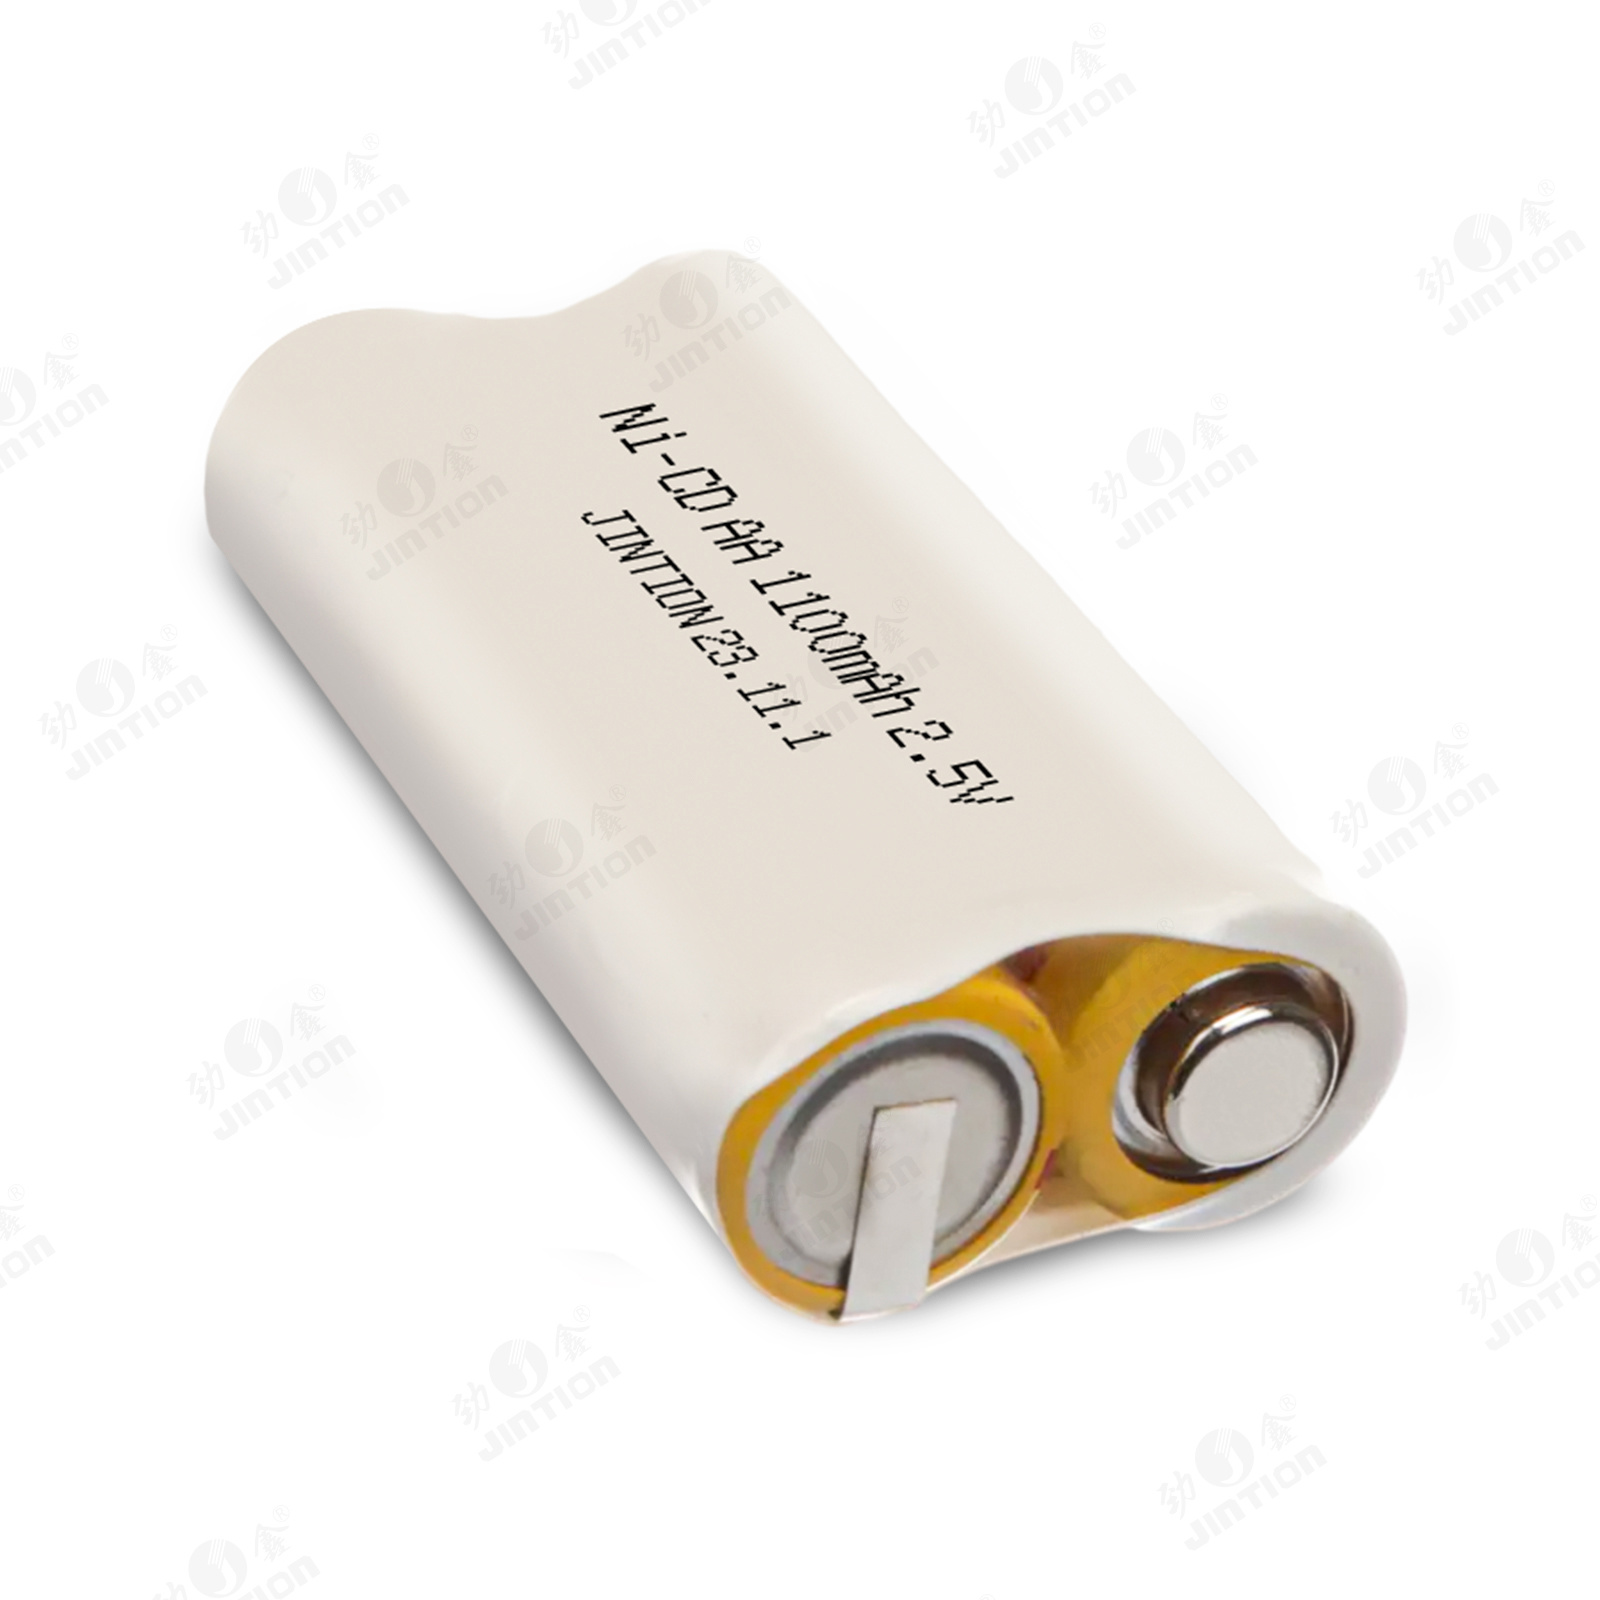 OEM NICD AA 1100mah 2.5v battery pack nicd rechargeable ni-cd battery for Welch Allyn devices